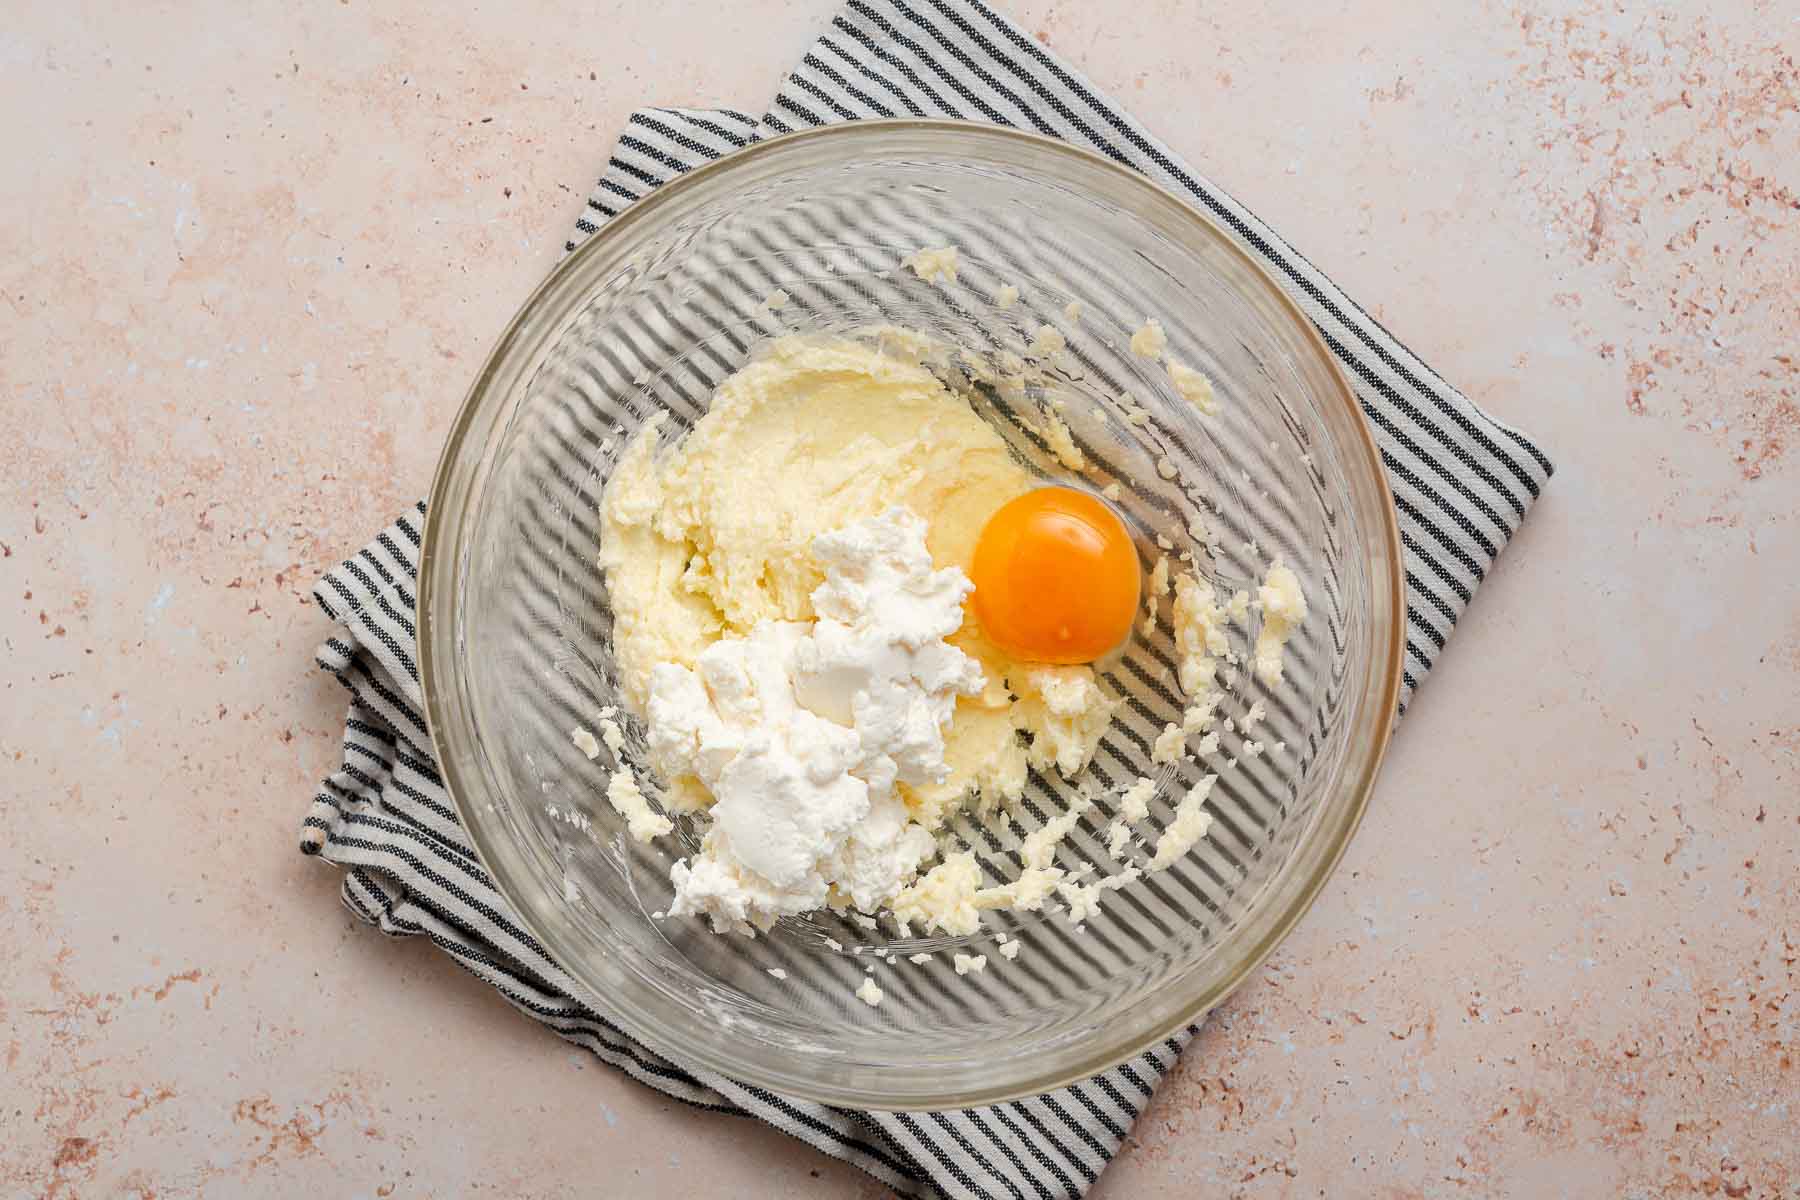 Egg and ricotta added to cake batter in glass bowl.